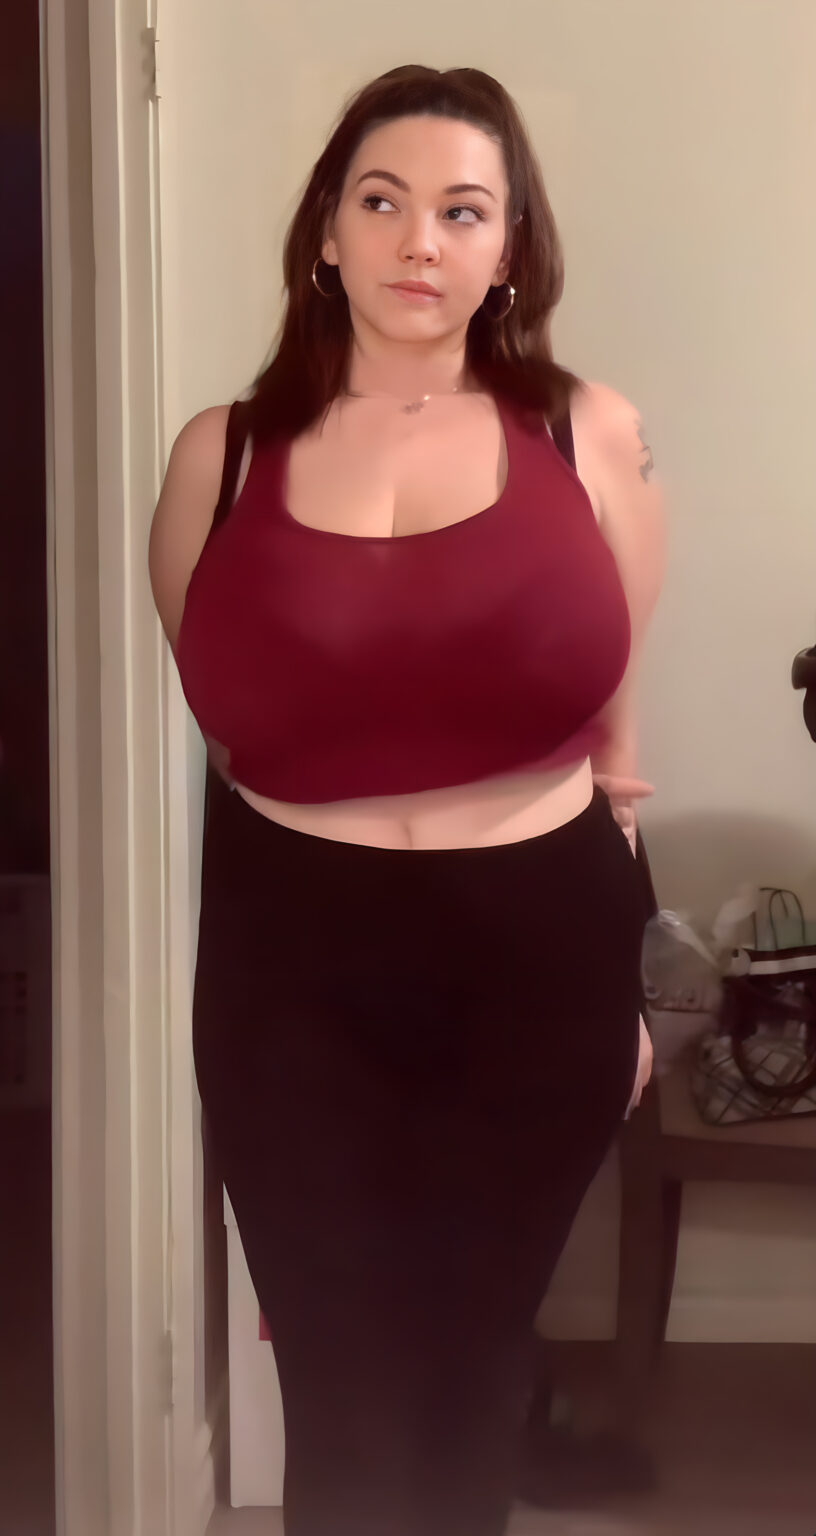 Lyla Canadian Big Tits Lylasbigheart Onlyfans Review Leaks Videos Nude Pictures 1282